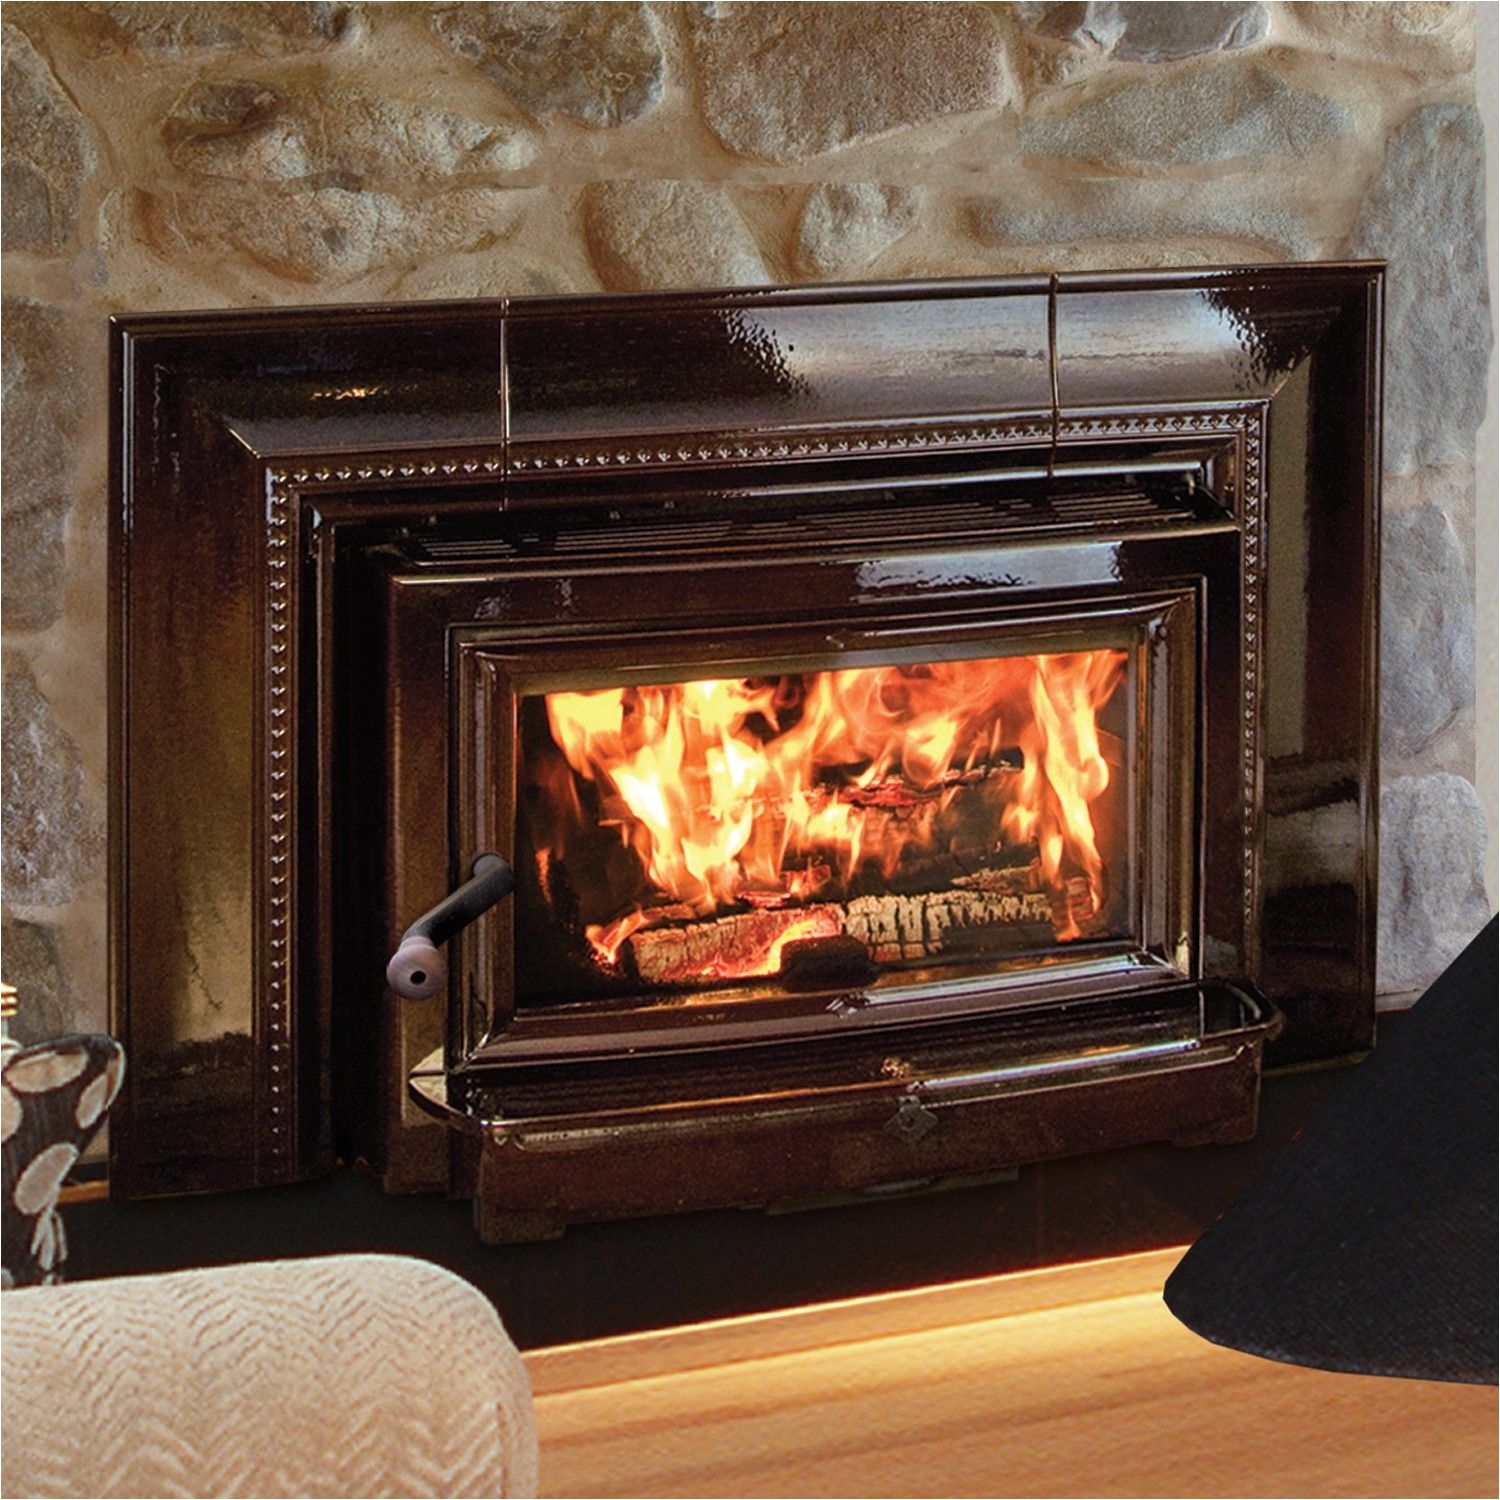 hearthstone insert clydesdale 8491 wood inserts heats up to 2 000 sq ft firebox capacity 2 4 cu ft size 75 000 btus epa certified 3 2 gph efficiency